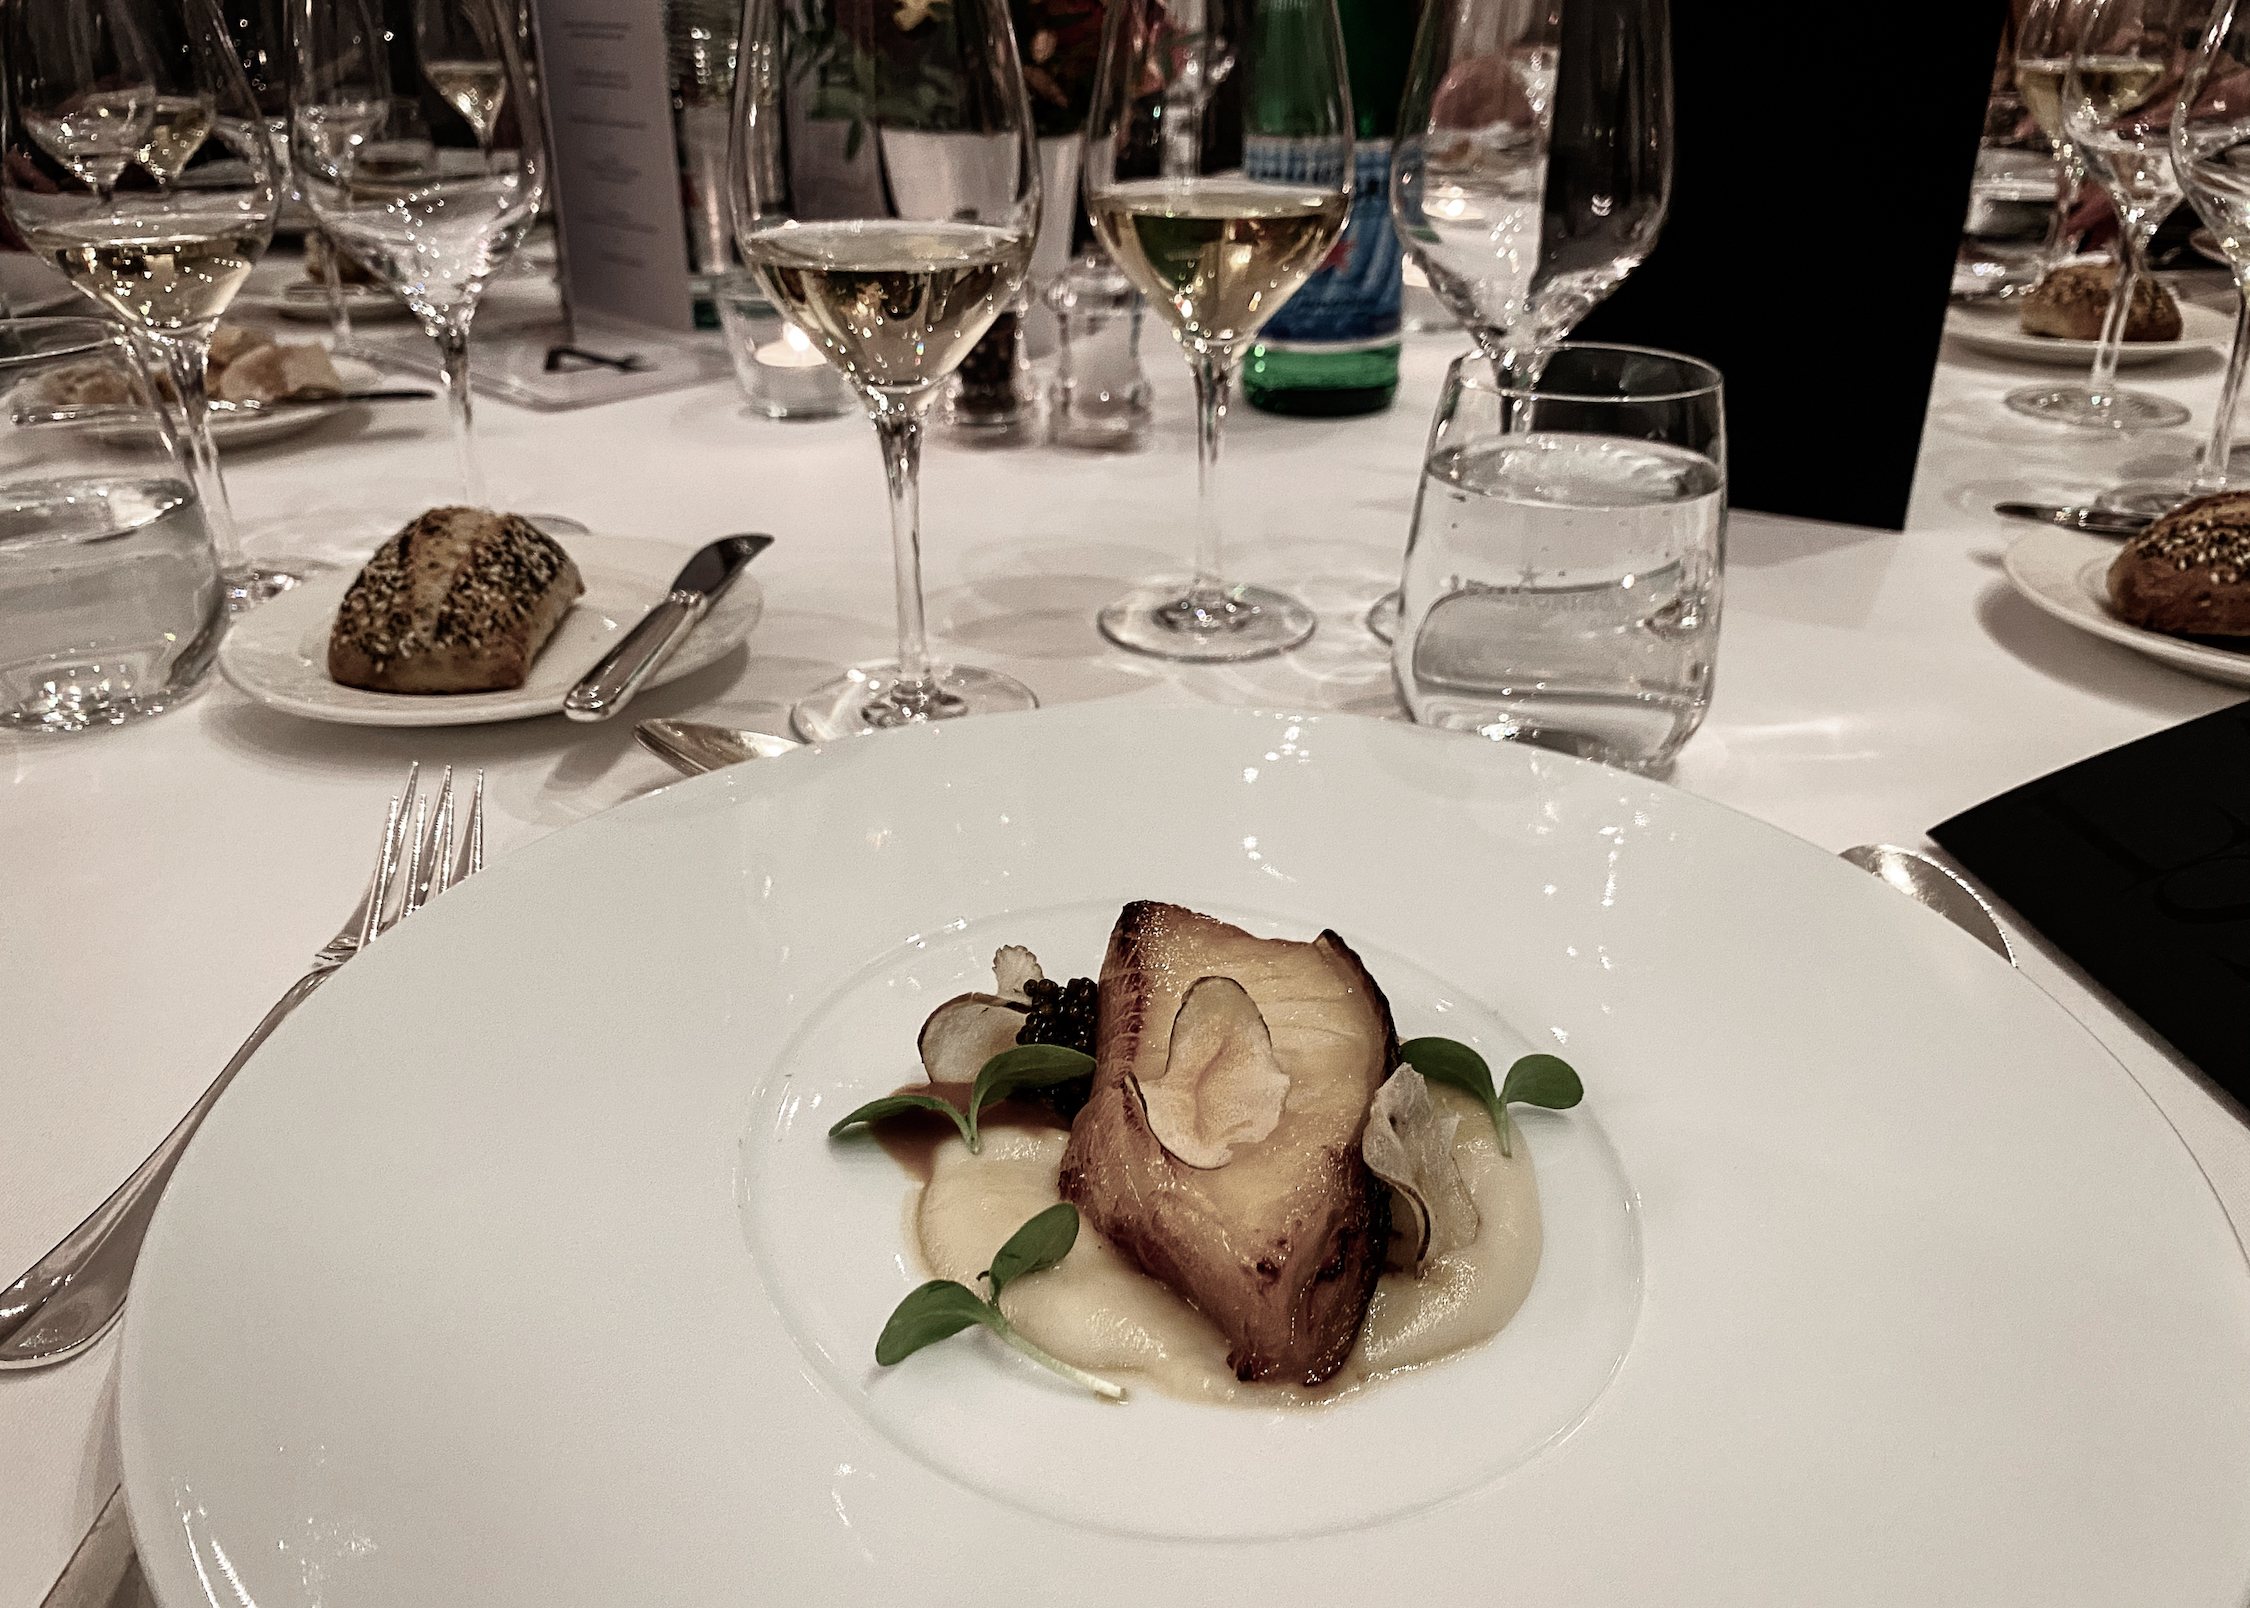 S.Pellegrino Sapori Ticino – 15 years of remarkable culinary experiences